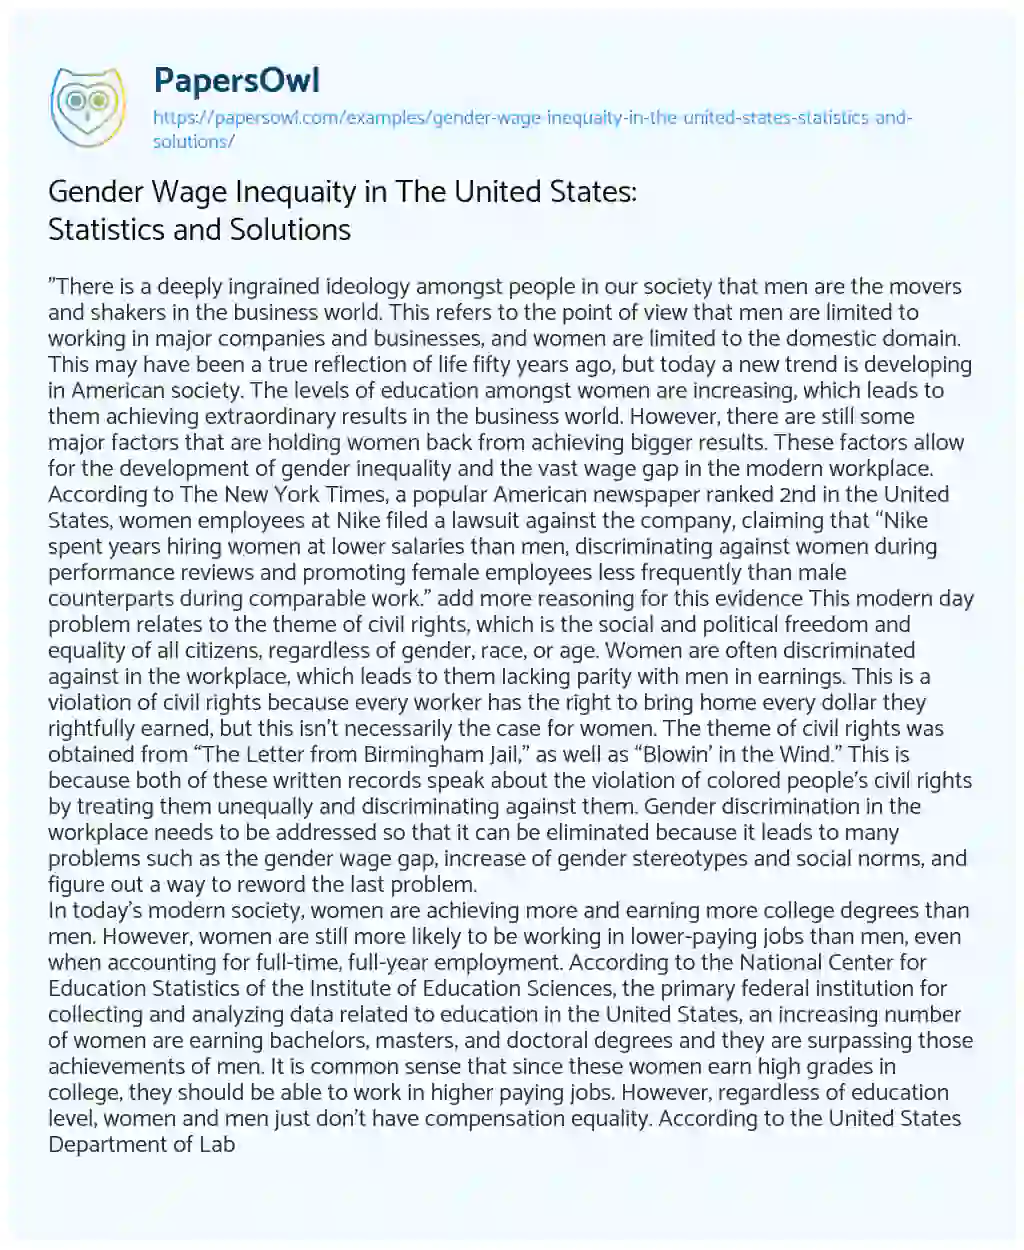 Essay on Gender Wage Inequaity in the United States: Statistics and Solutions